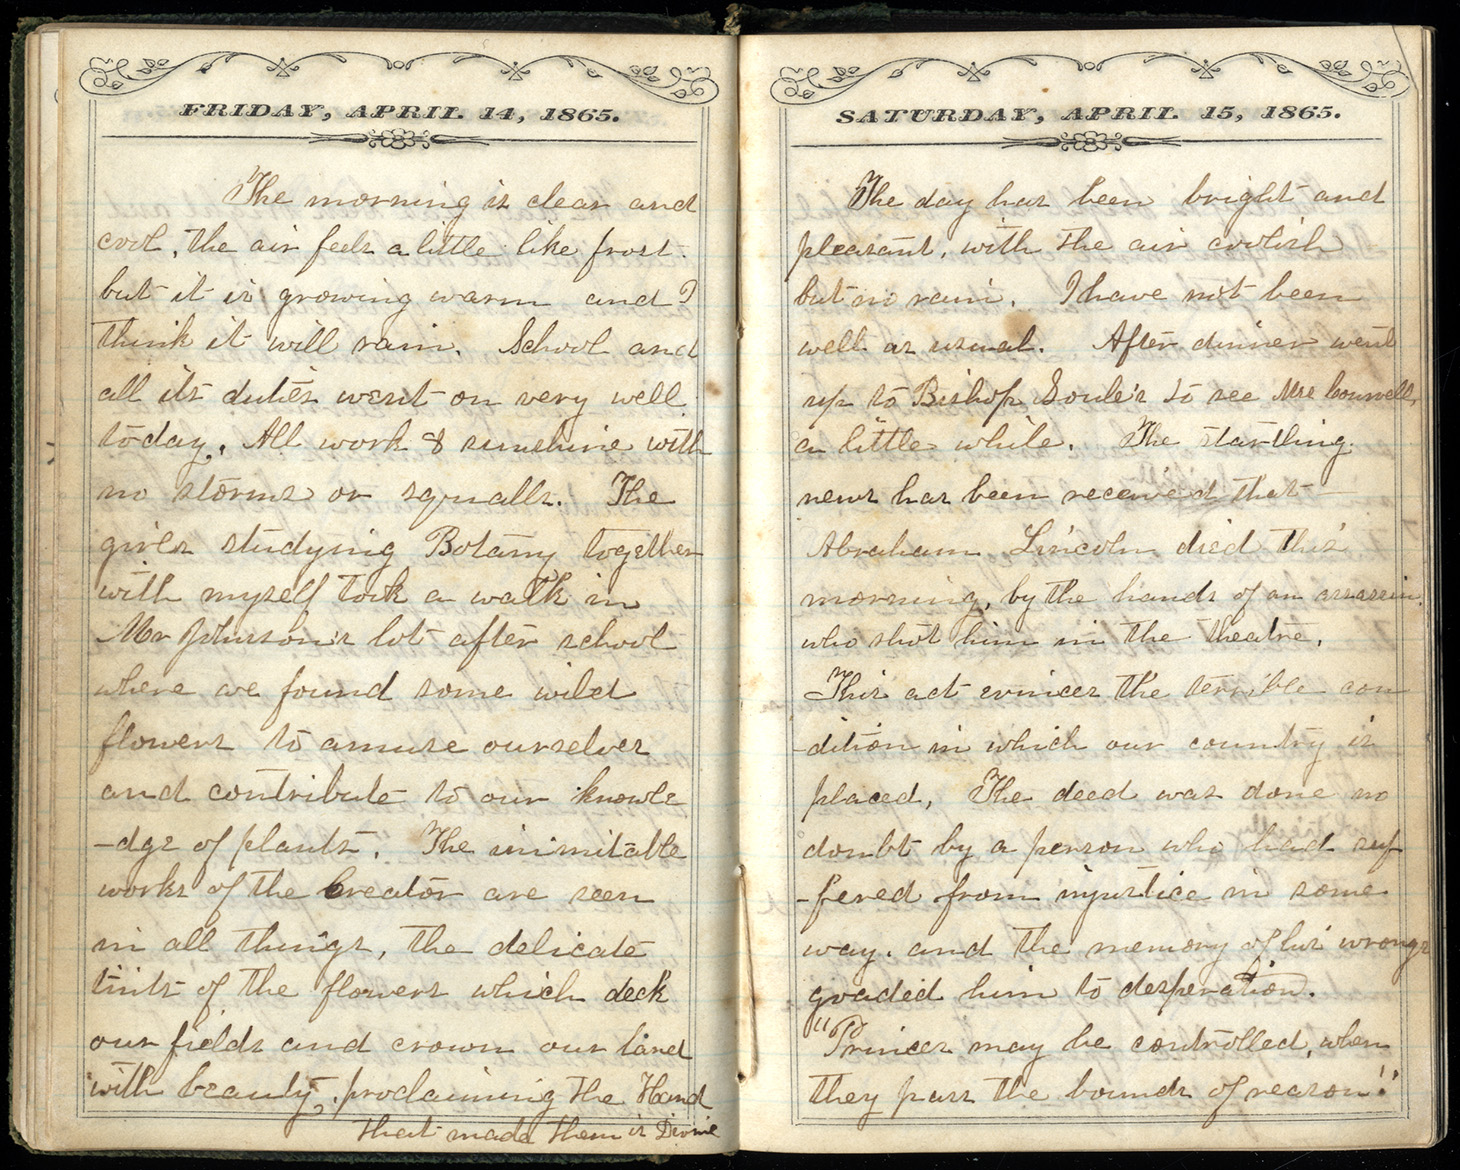 Handwritten diary pages with dates of April 14 and April 15, 1865, printed at top